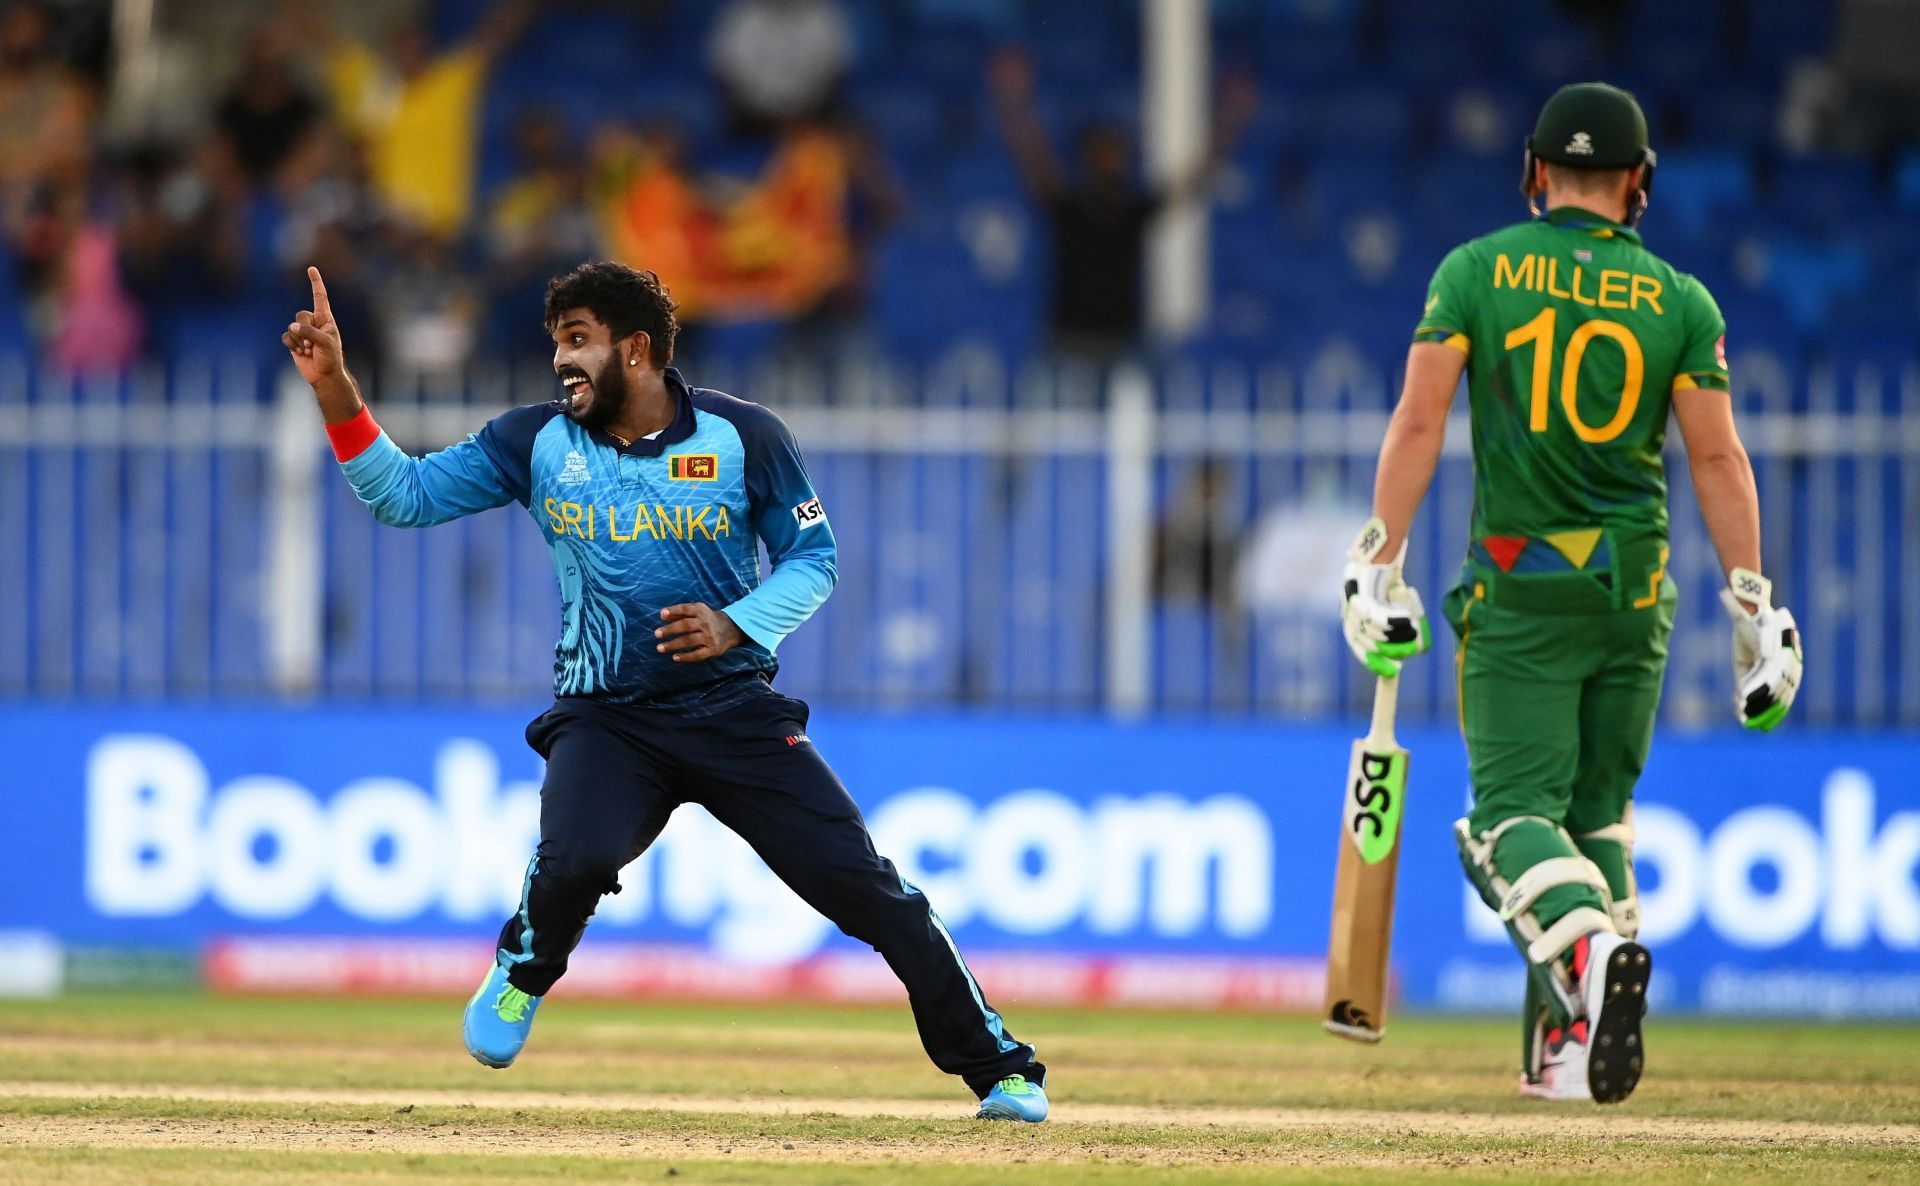 Wanindu Hasaranga is the only Asian to take a T20 World Cup hat-trick